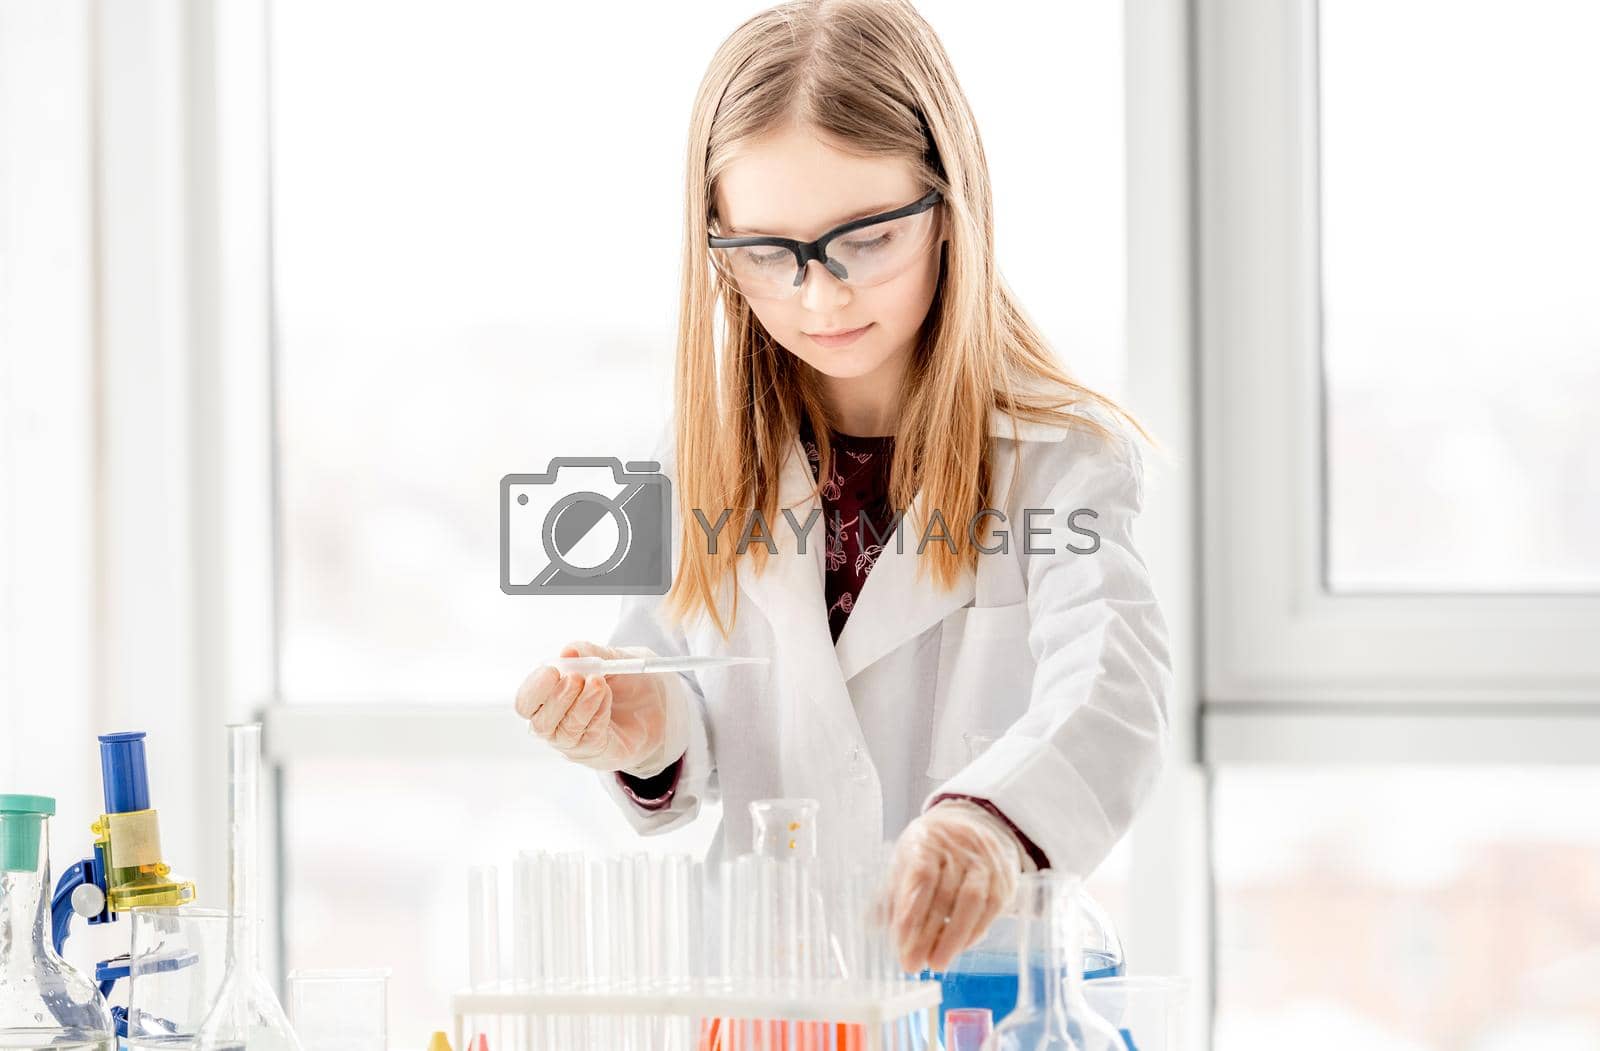 Royalty free image of Girl on chemistry lesson by tan4ikk1